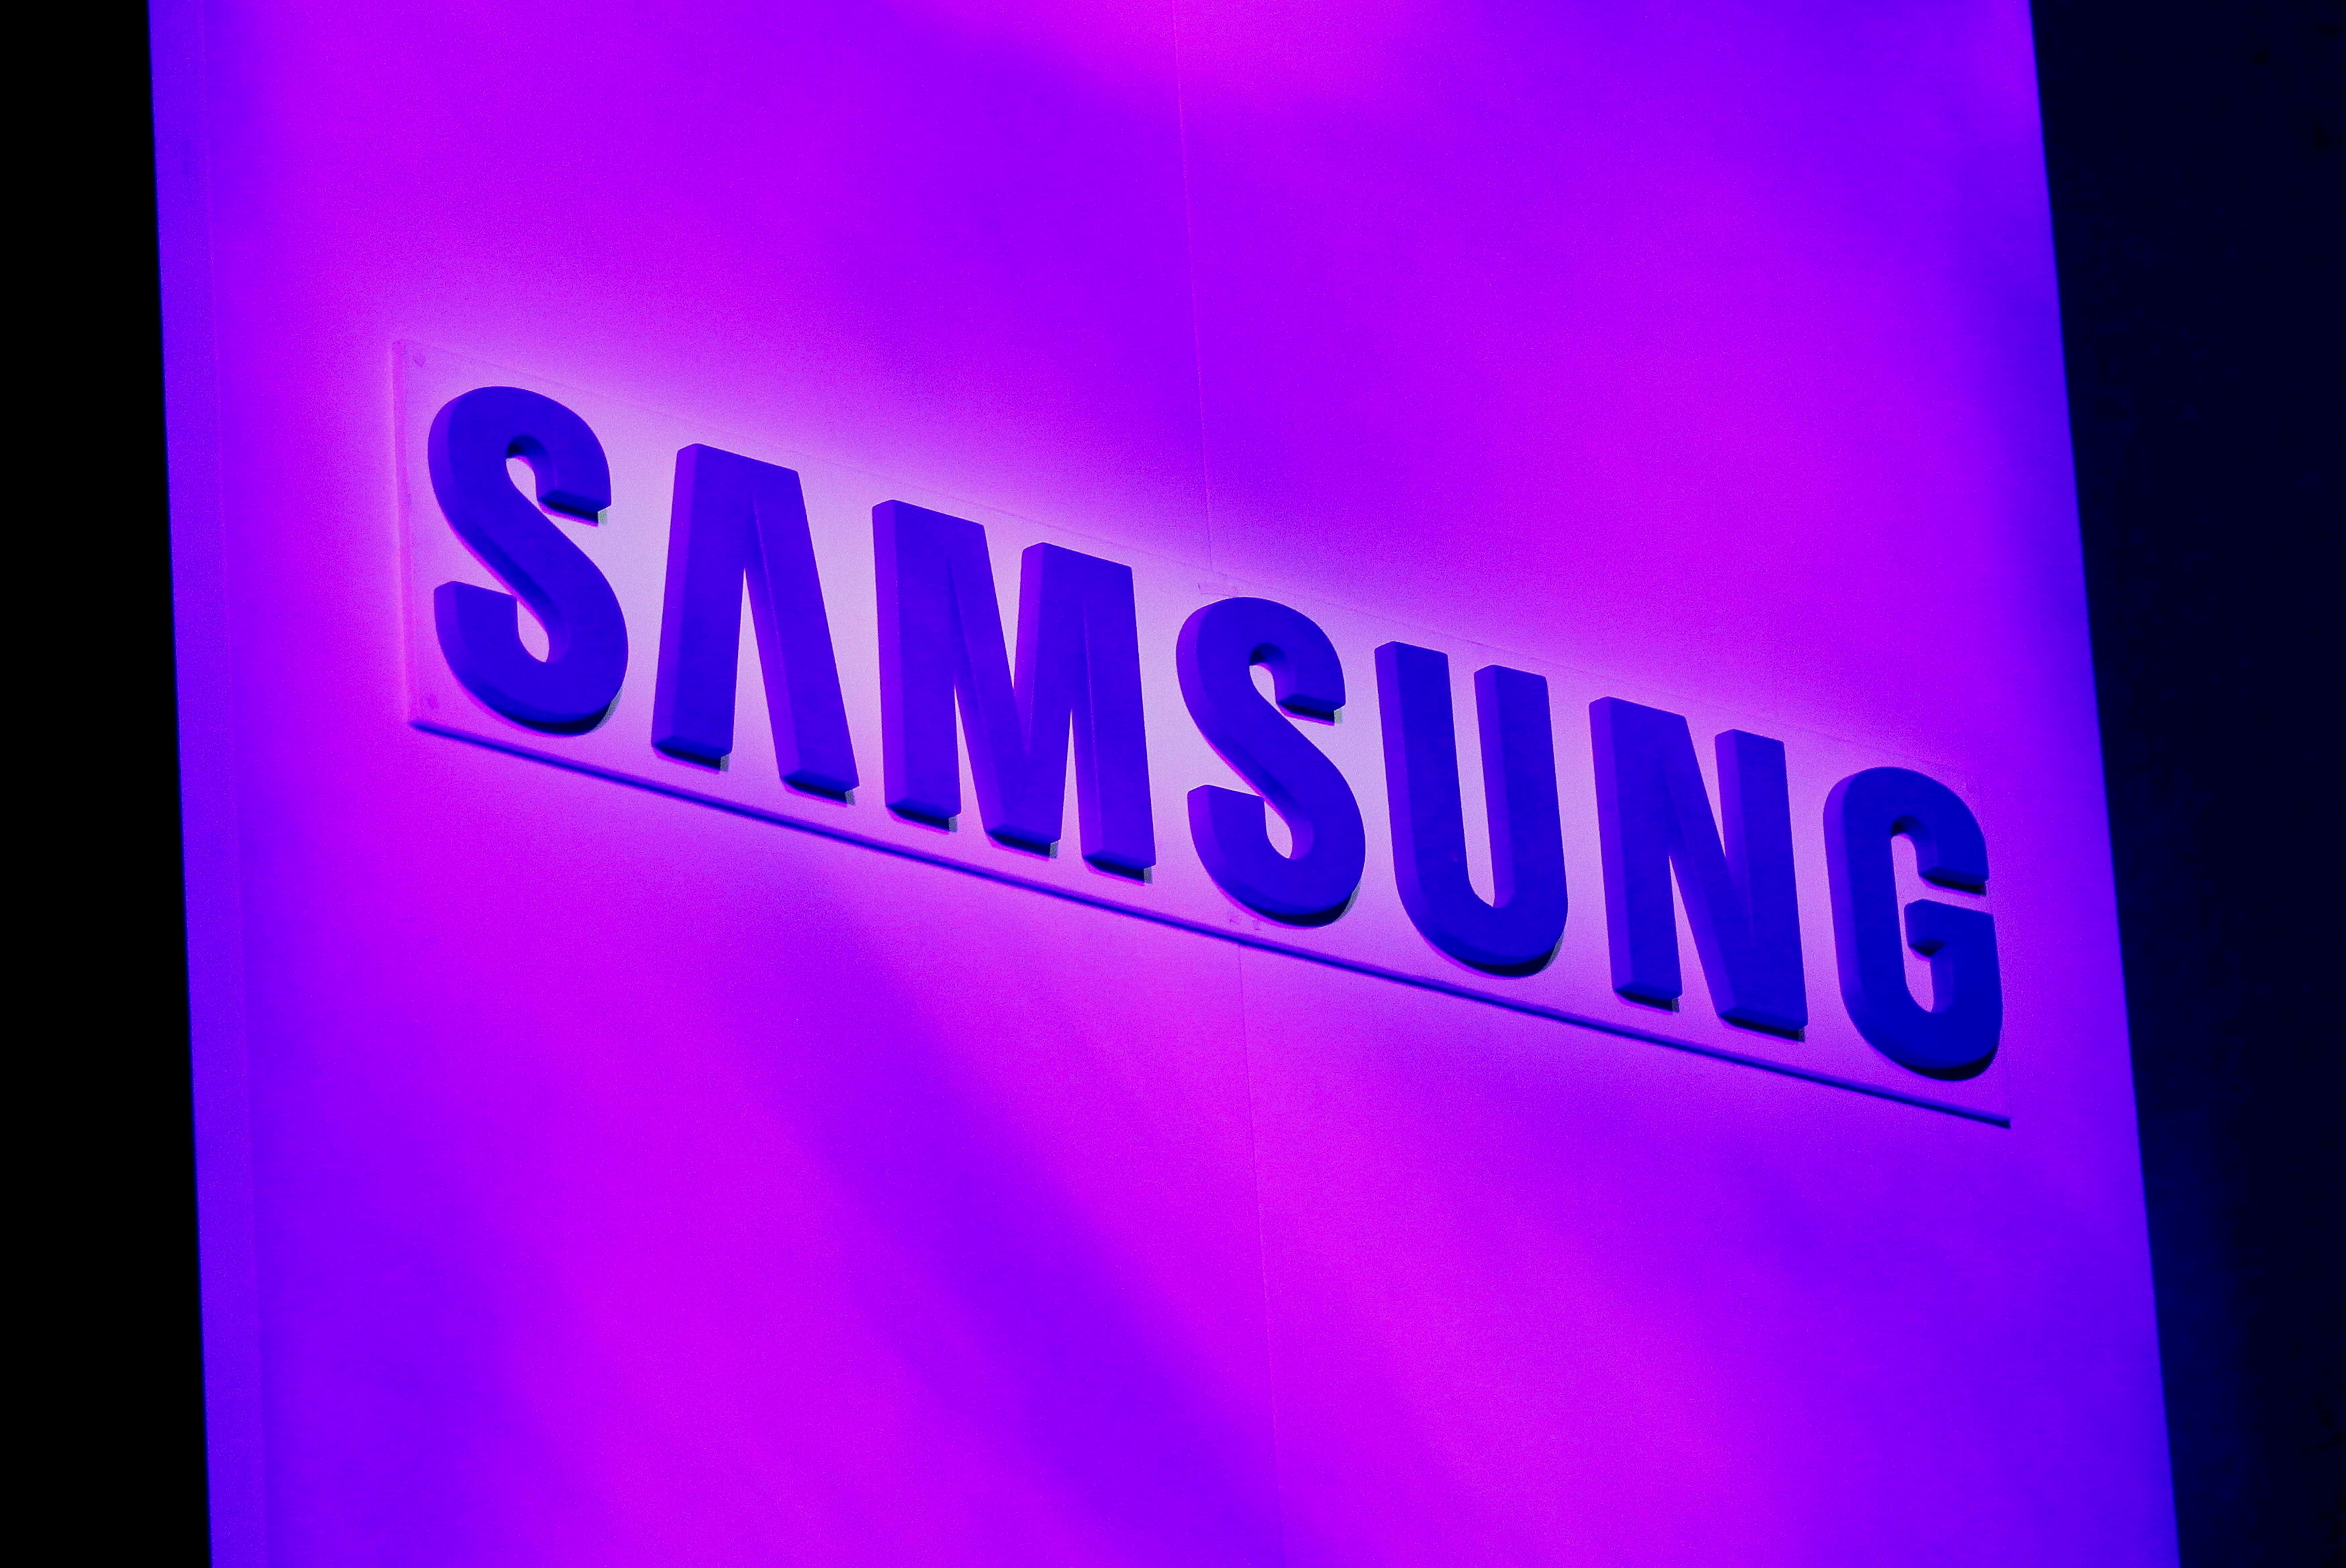 The company logo is displayed at the Samsung news conference at the Consumer Electronics Show (CES) in Las Vegas January 7, 2013. REUTERS/Rick Wilking/File Photo